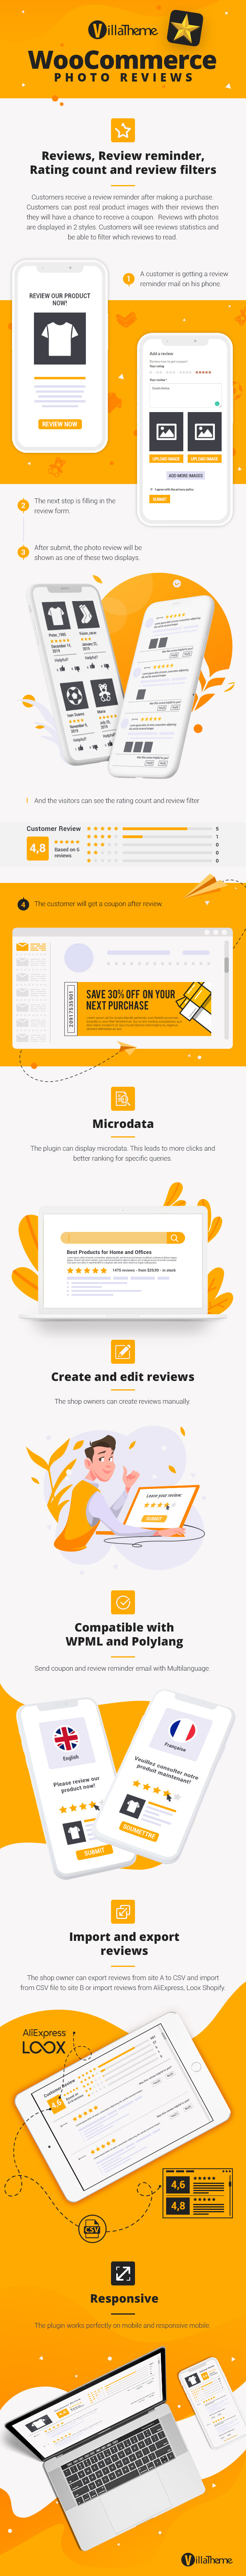 WooCommerce Photo Reviews - Review Reminders - Review for Discounts - 5